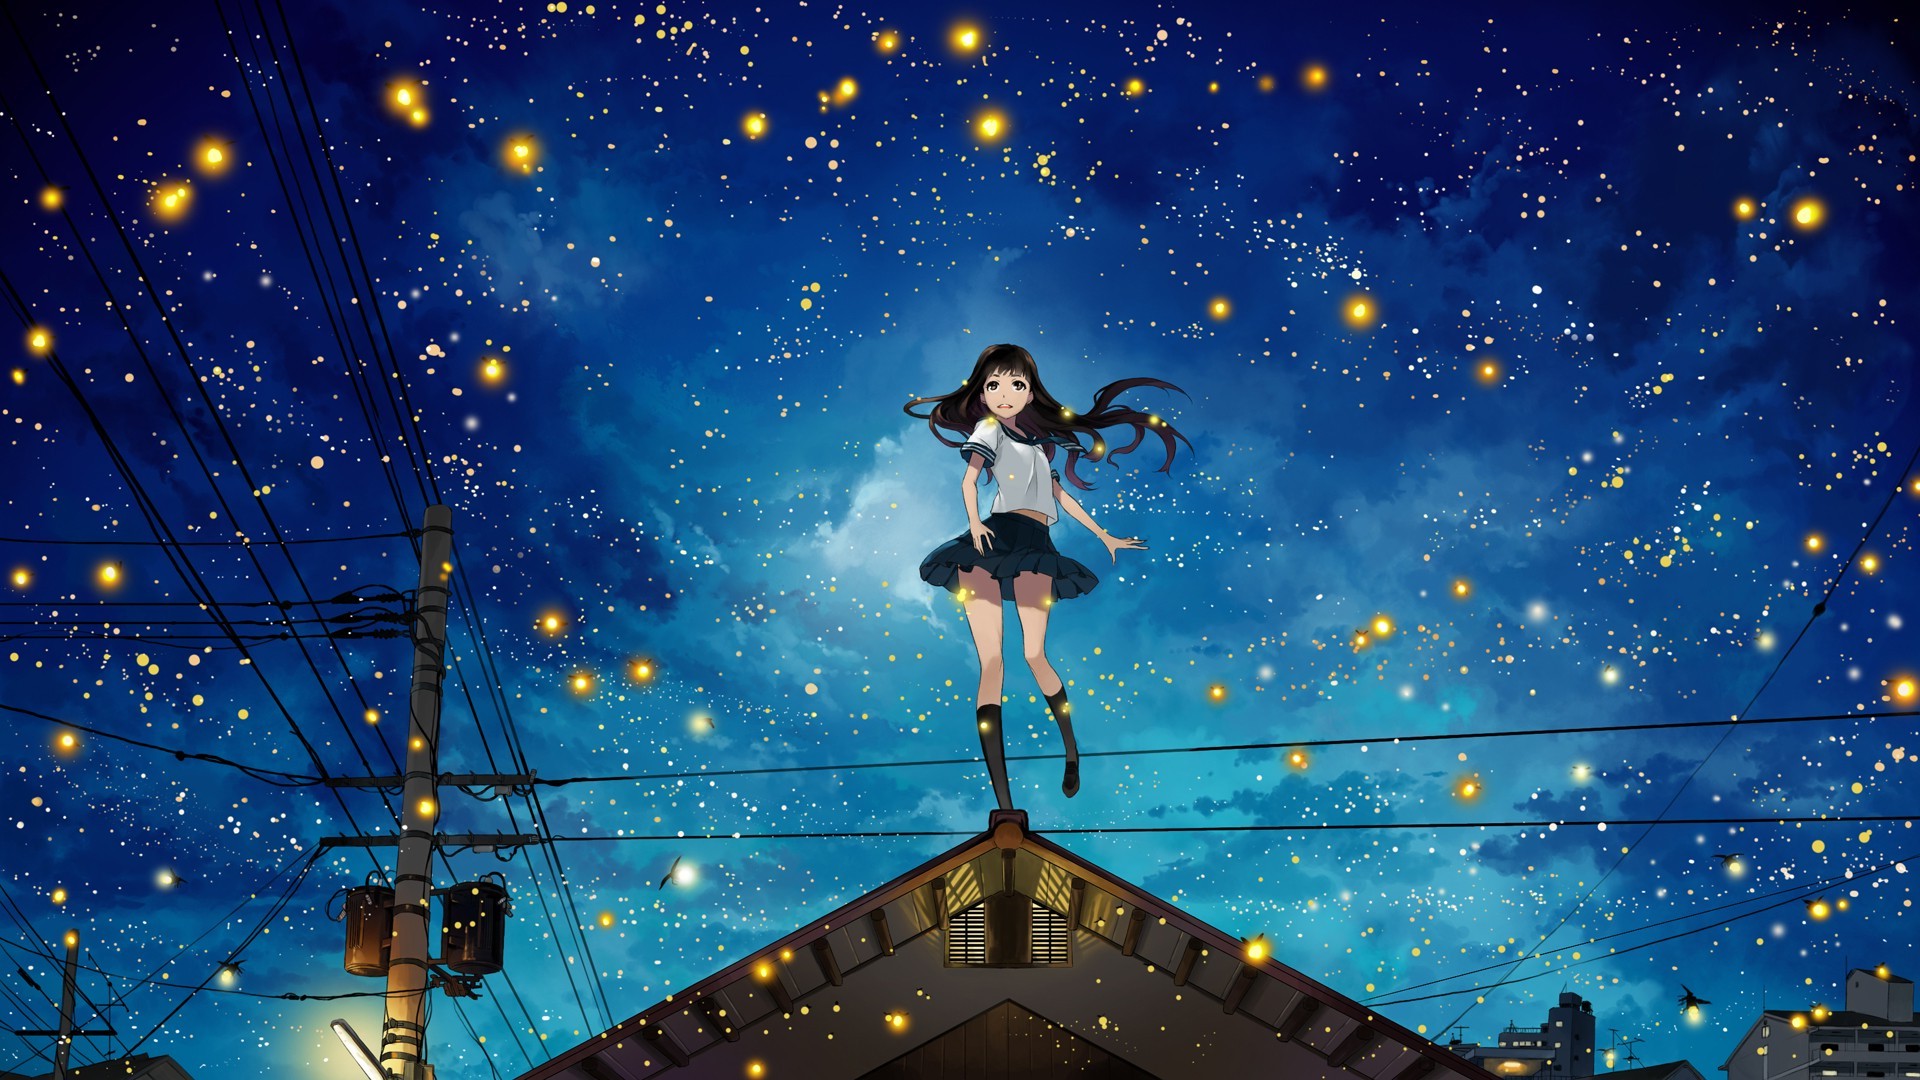 night, Power Lines, Rooftops, Stars, Anime Girls, Original Characters,  Fireflies, Utility Pole Wallpapers HD / Desktop and Mobile Backgrounds